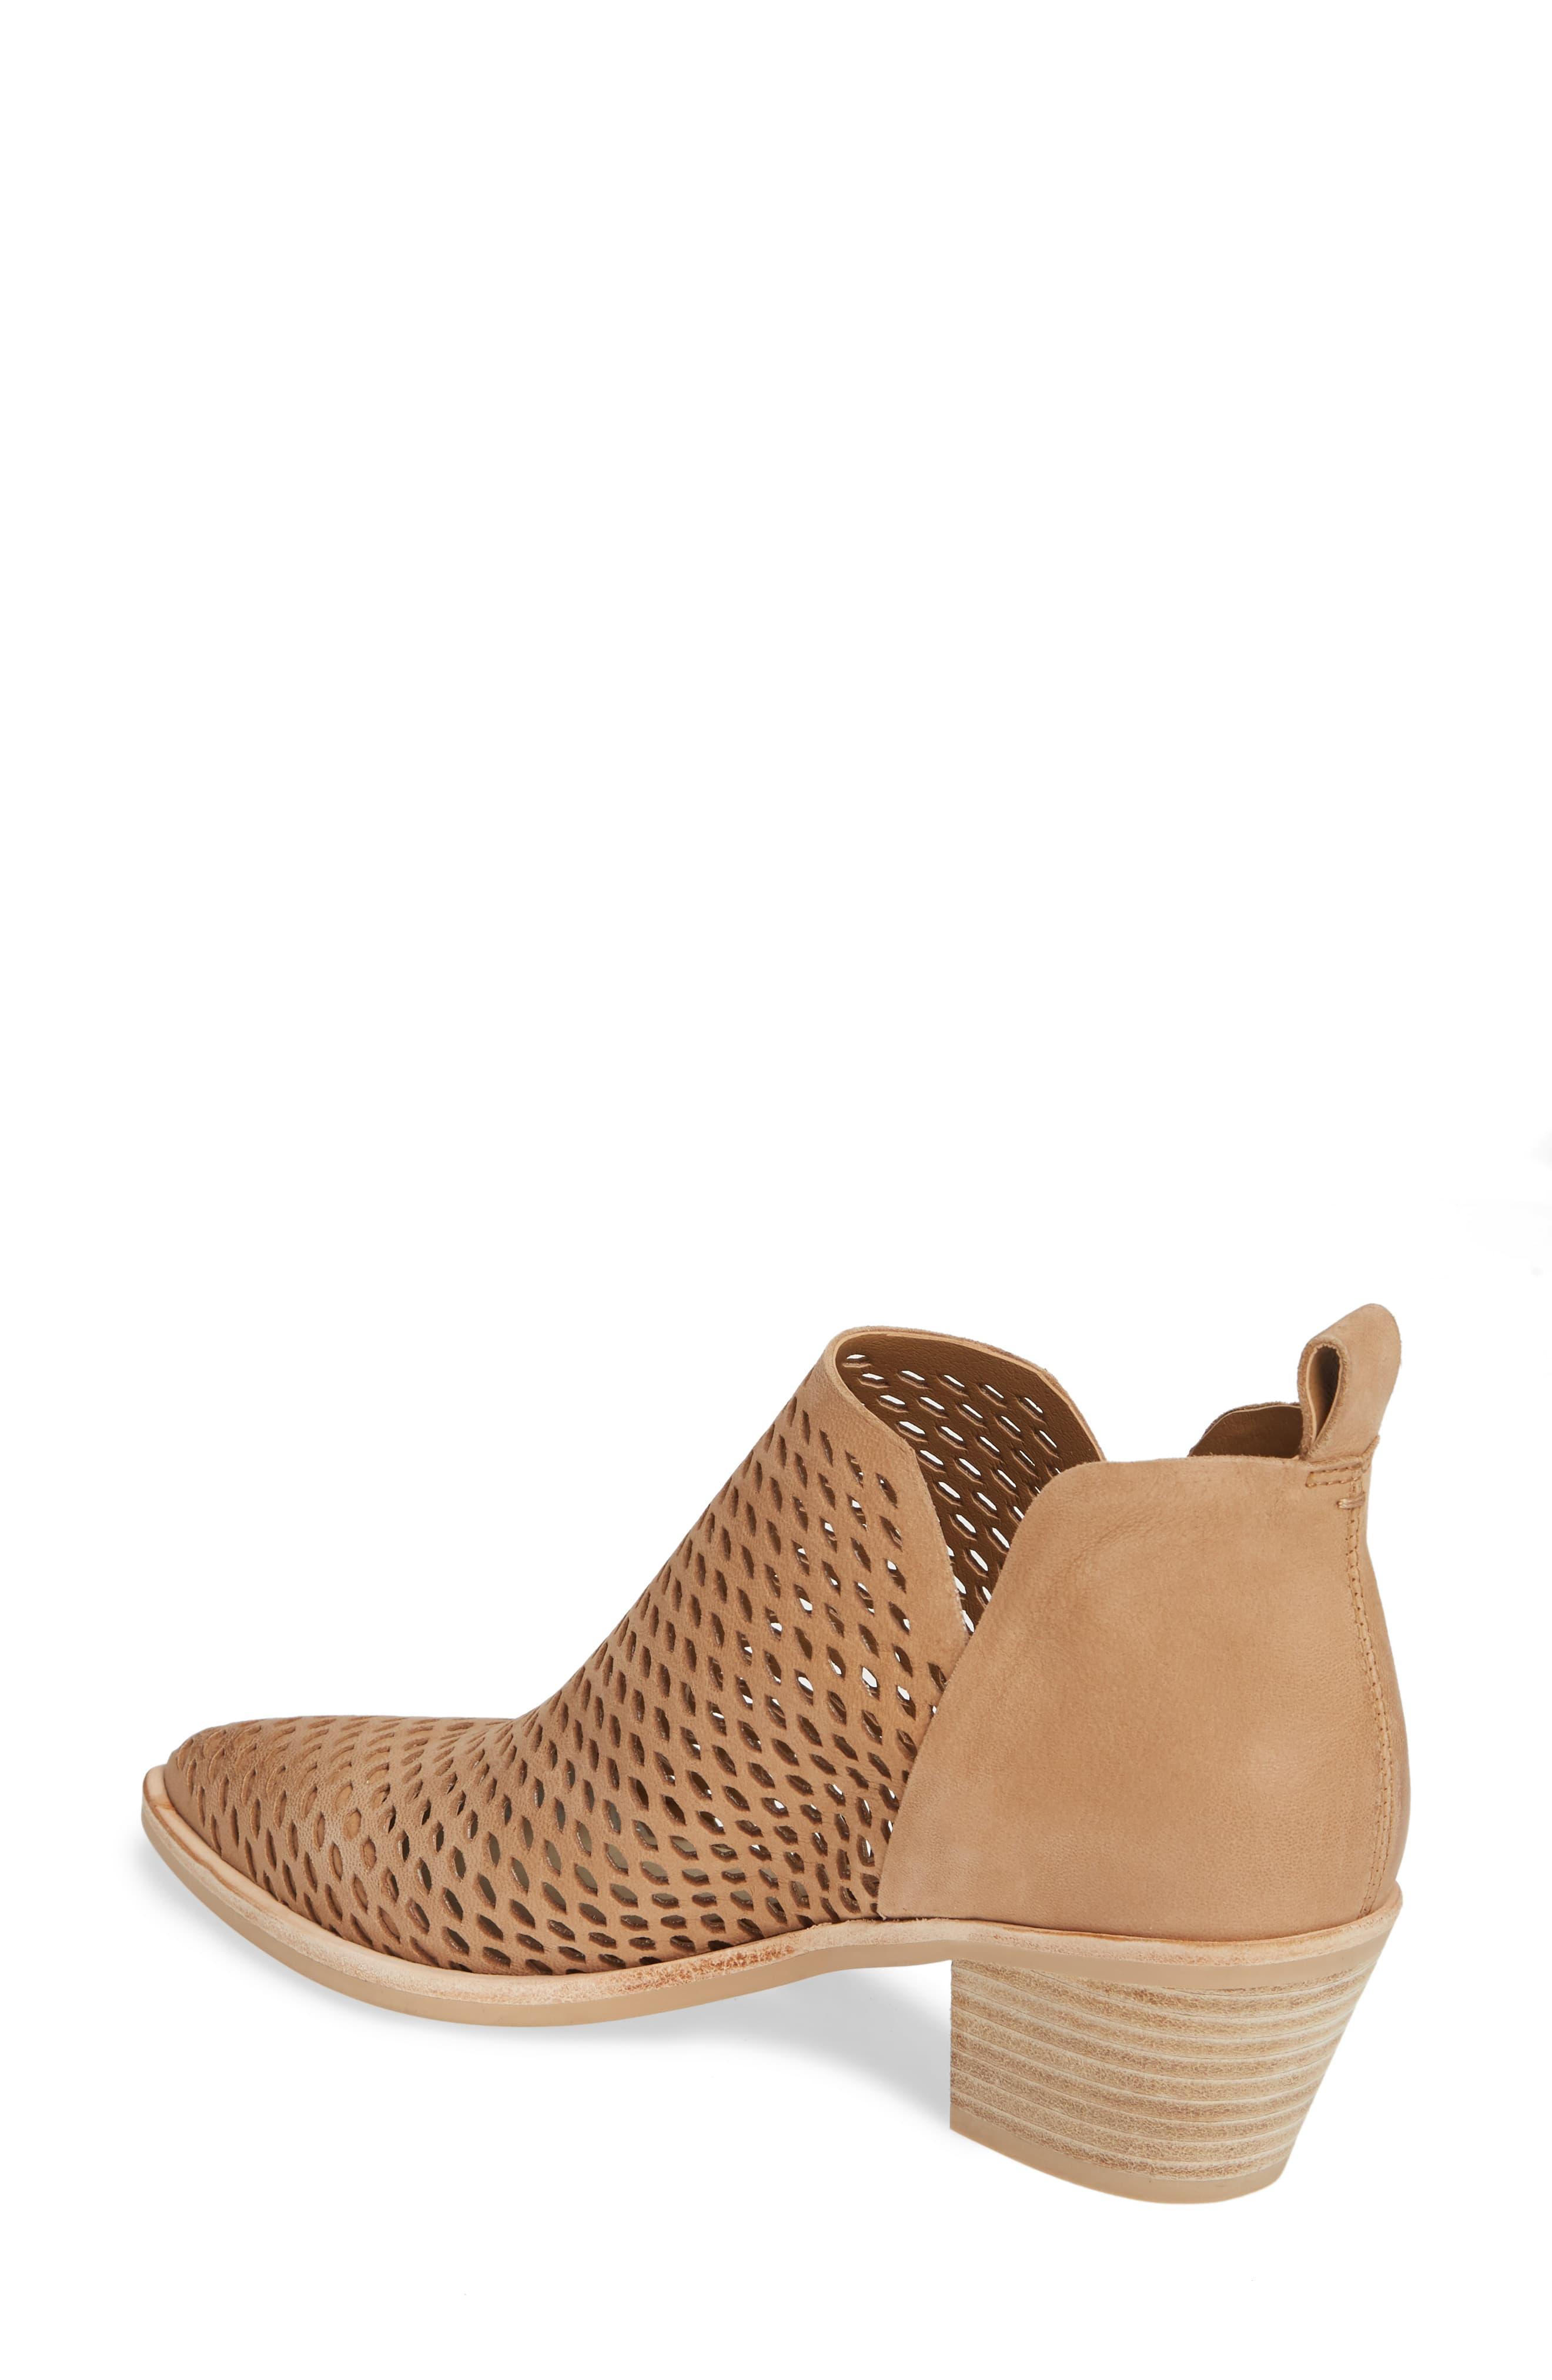 dolce vita sher perforated bootie